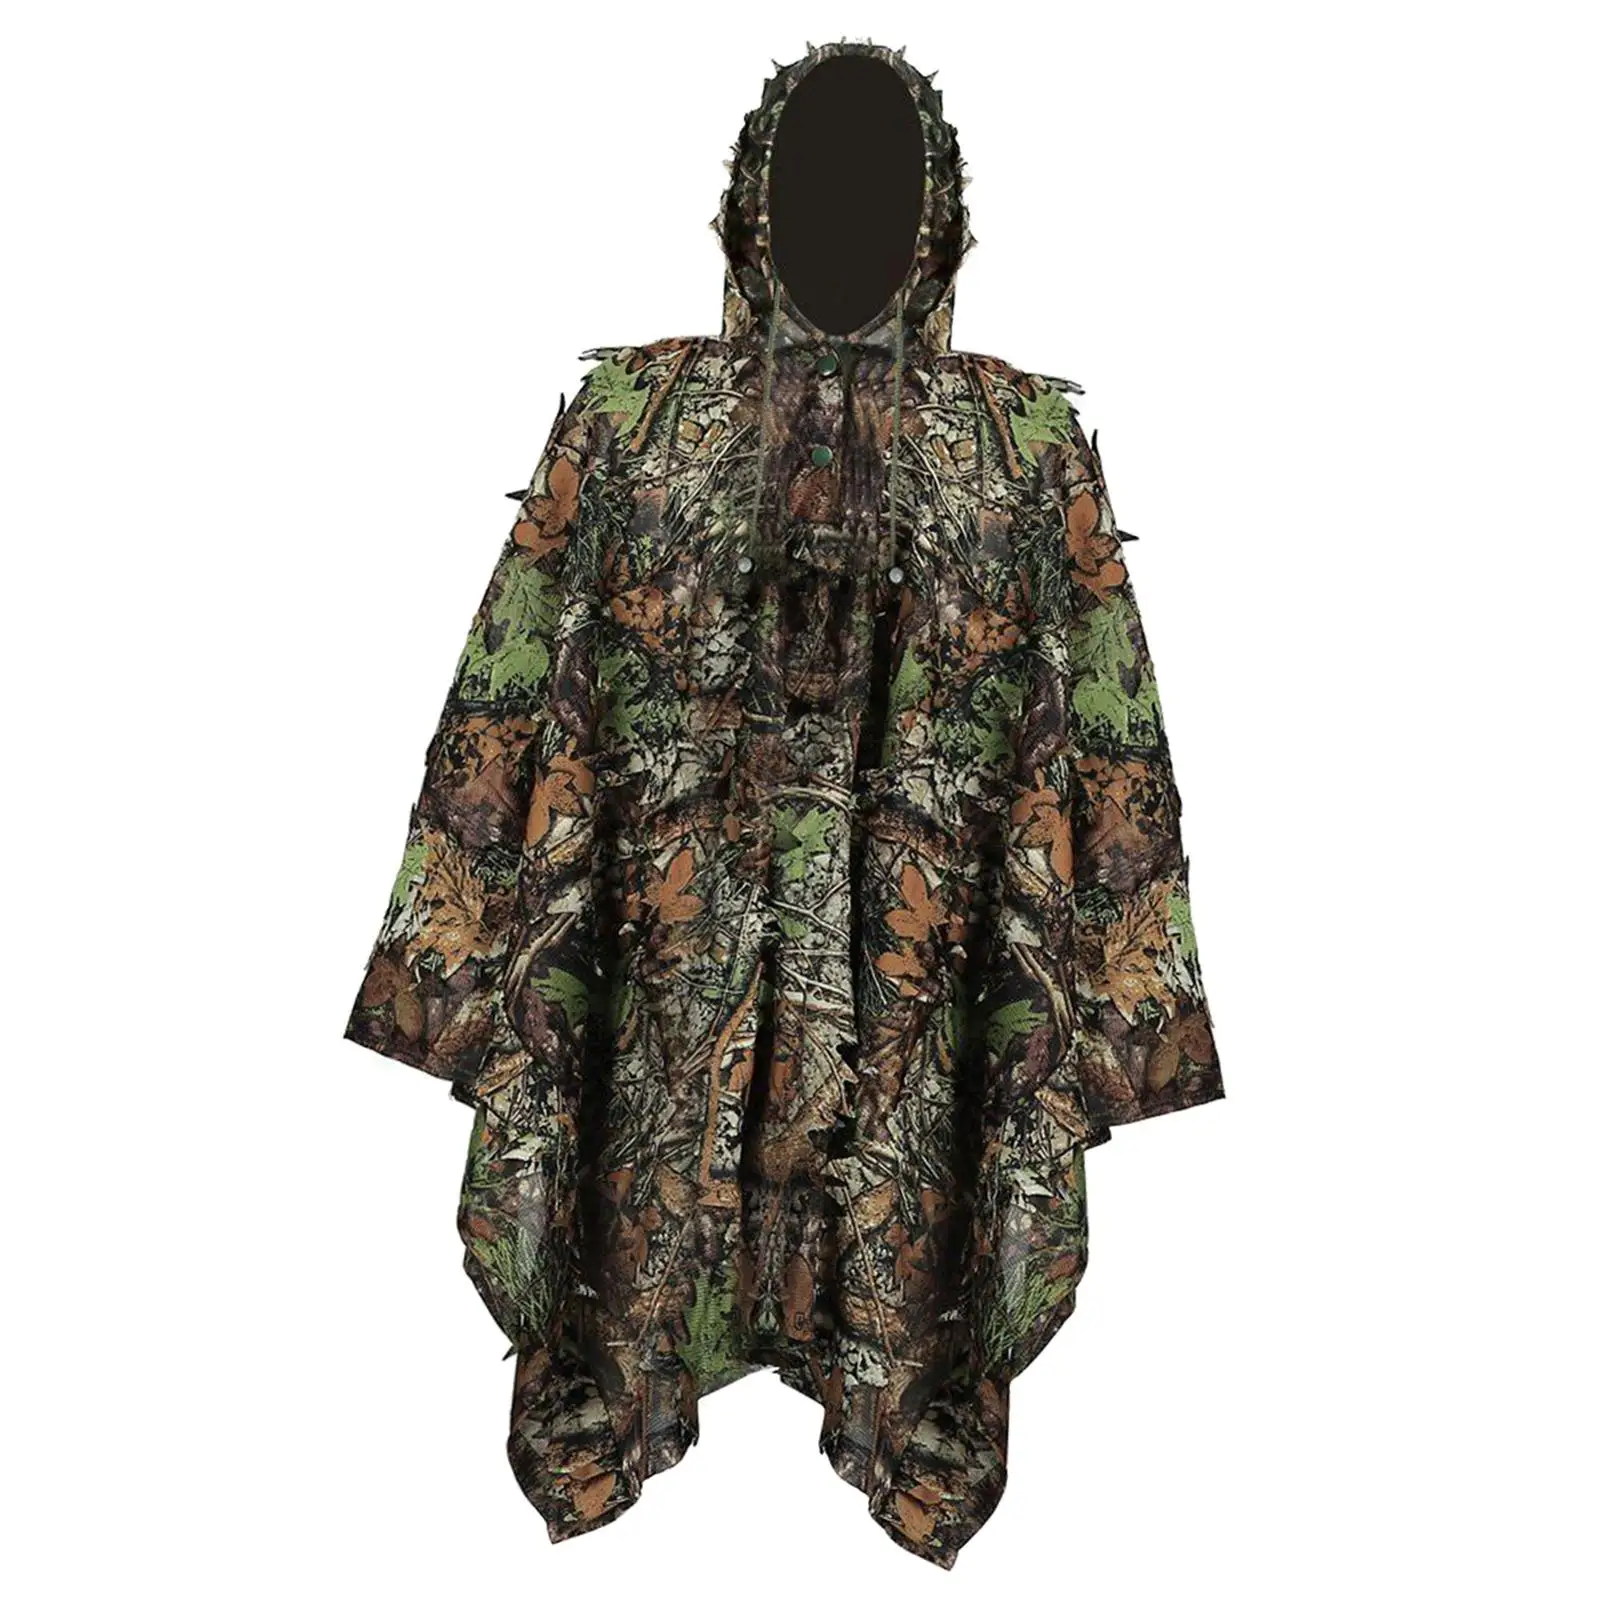 Ghillie Suit for Men Breathable Woodland Clothes Jacket Hood Cosplay suits for Photography Hunting Party Halloween Bird Watching